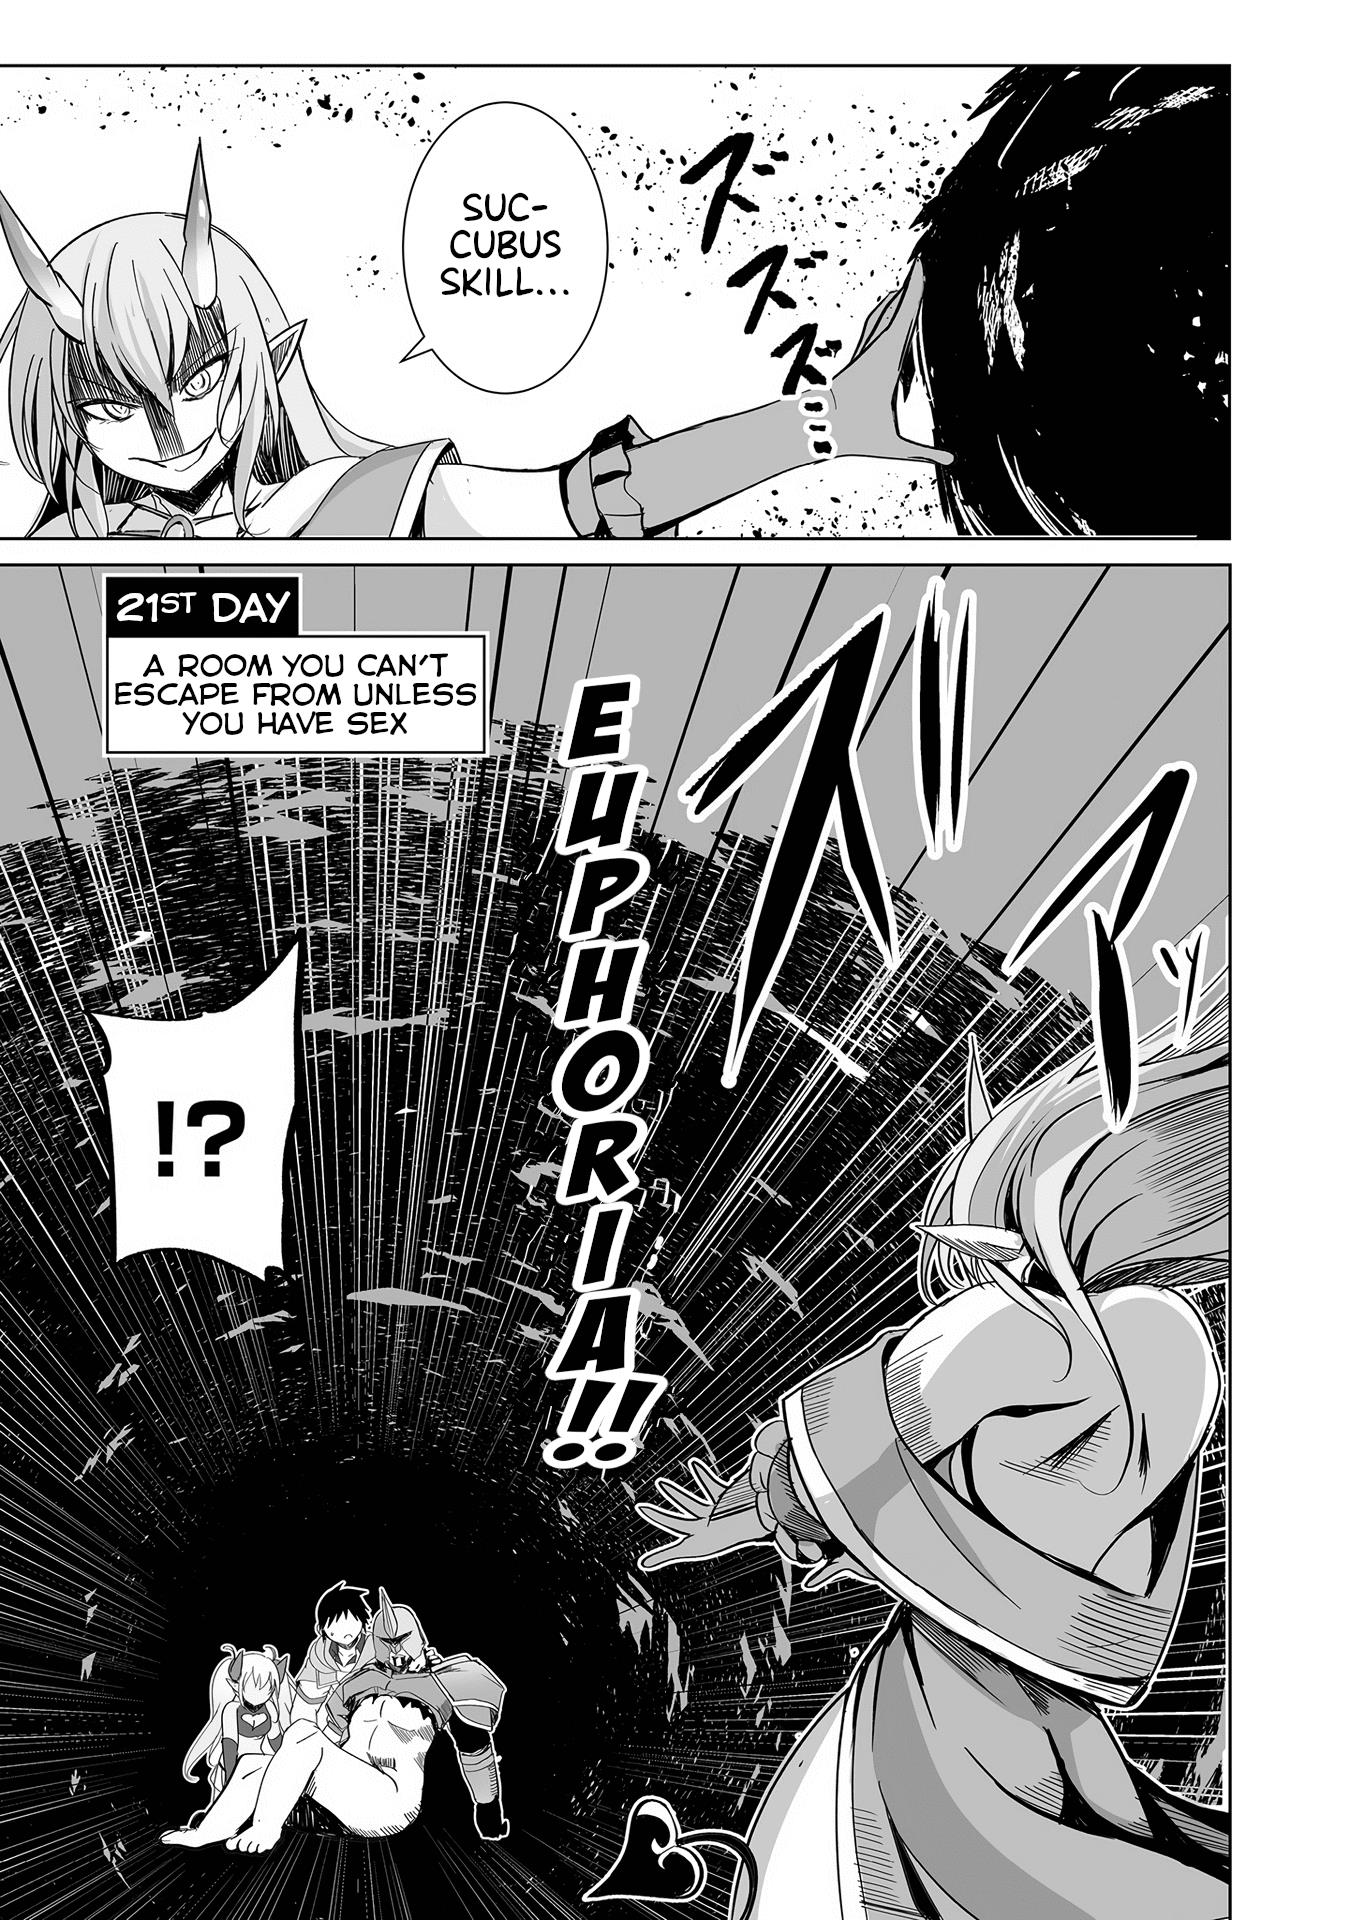 Dunking On Succubi In Another World Vol.4 Chapter 21: A Room You Can’T Escape From Unless You Have Sex - Picture 1